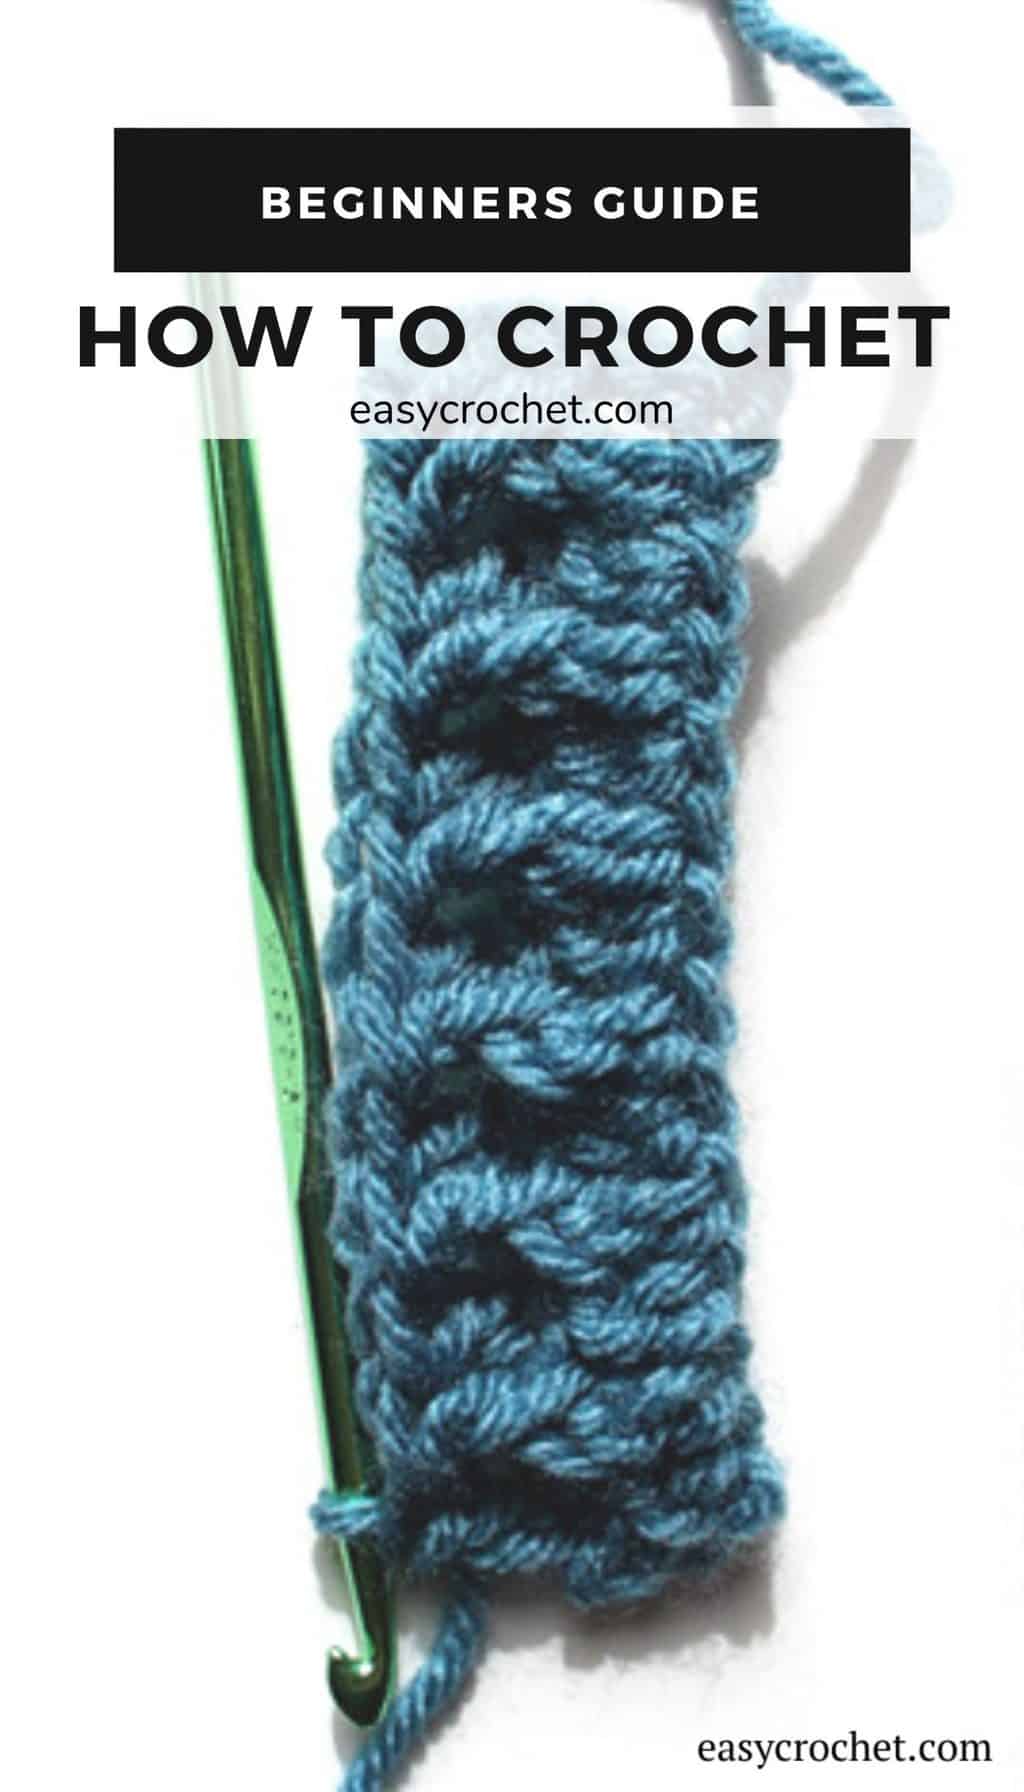 Learn how to crochet with our beginner guide! Explains everything you need to know to start crocheting today! Find complete guide at Easycrochet.com via @easycrochetcom